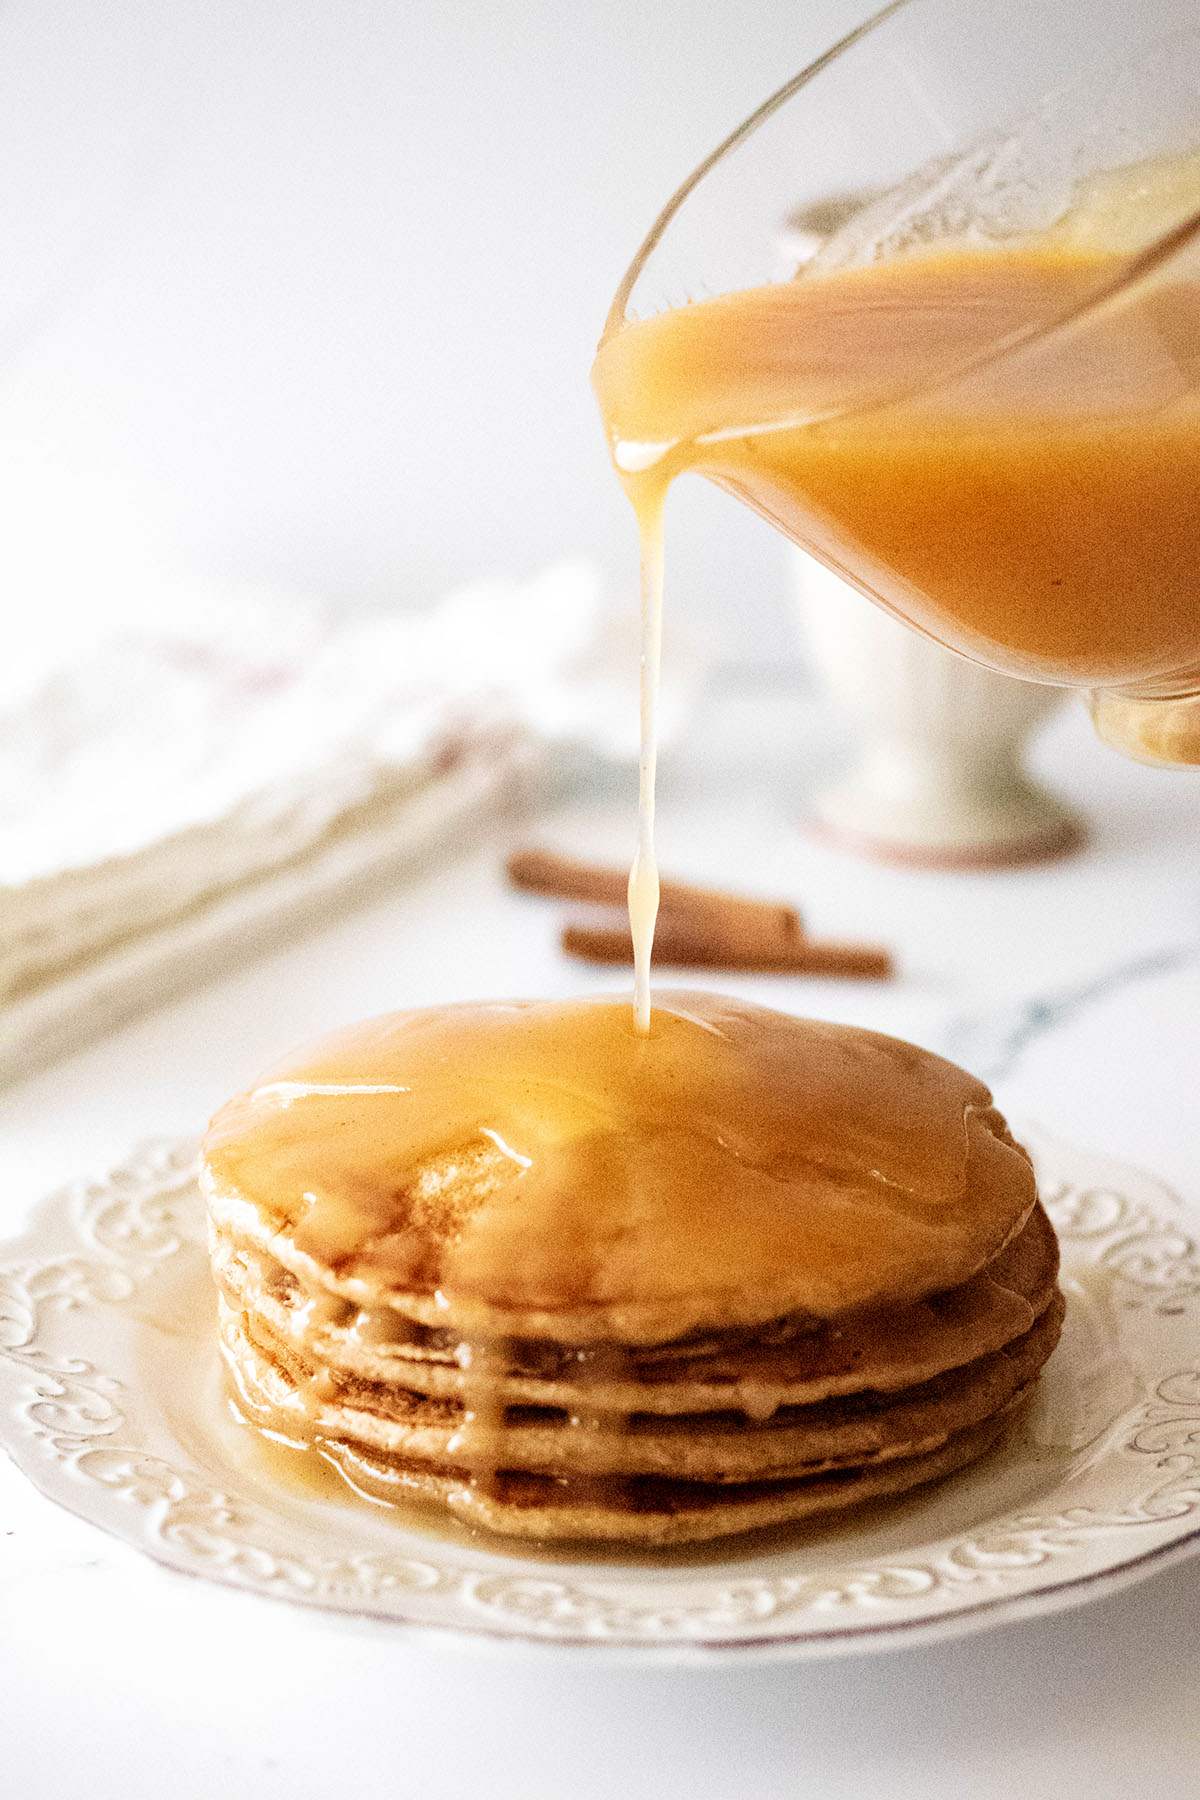 Syrup being poured on cinnamon oatmeal pancakes